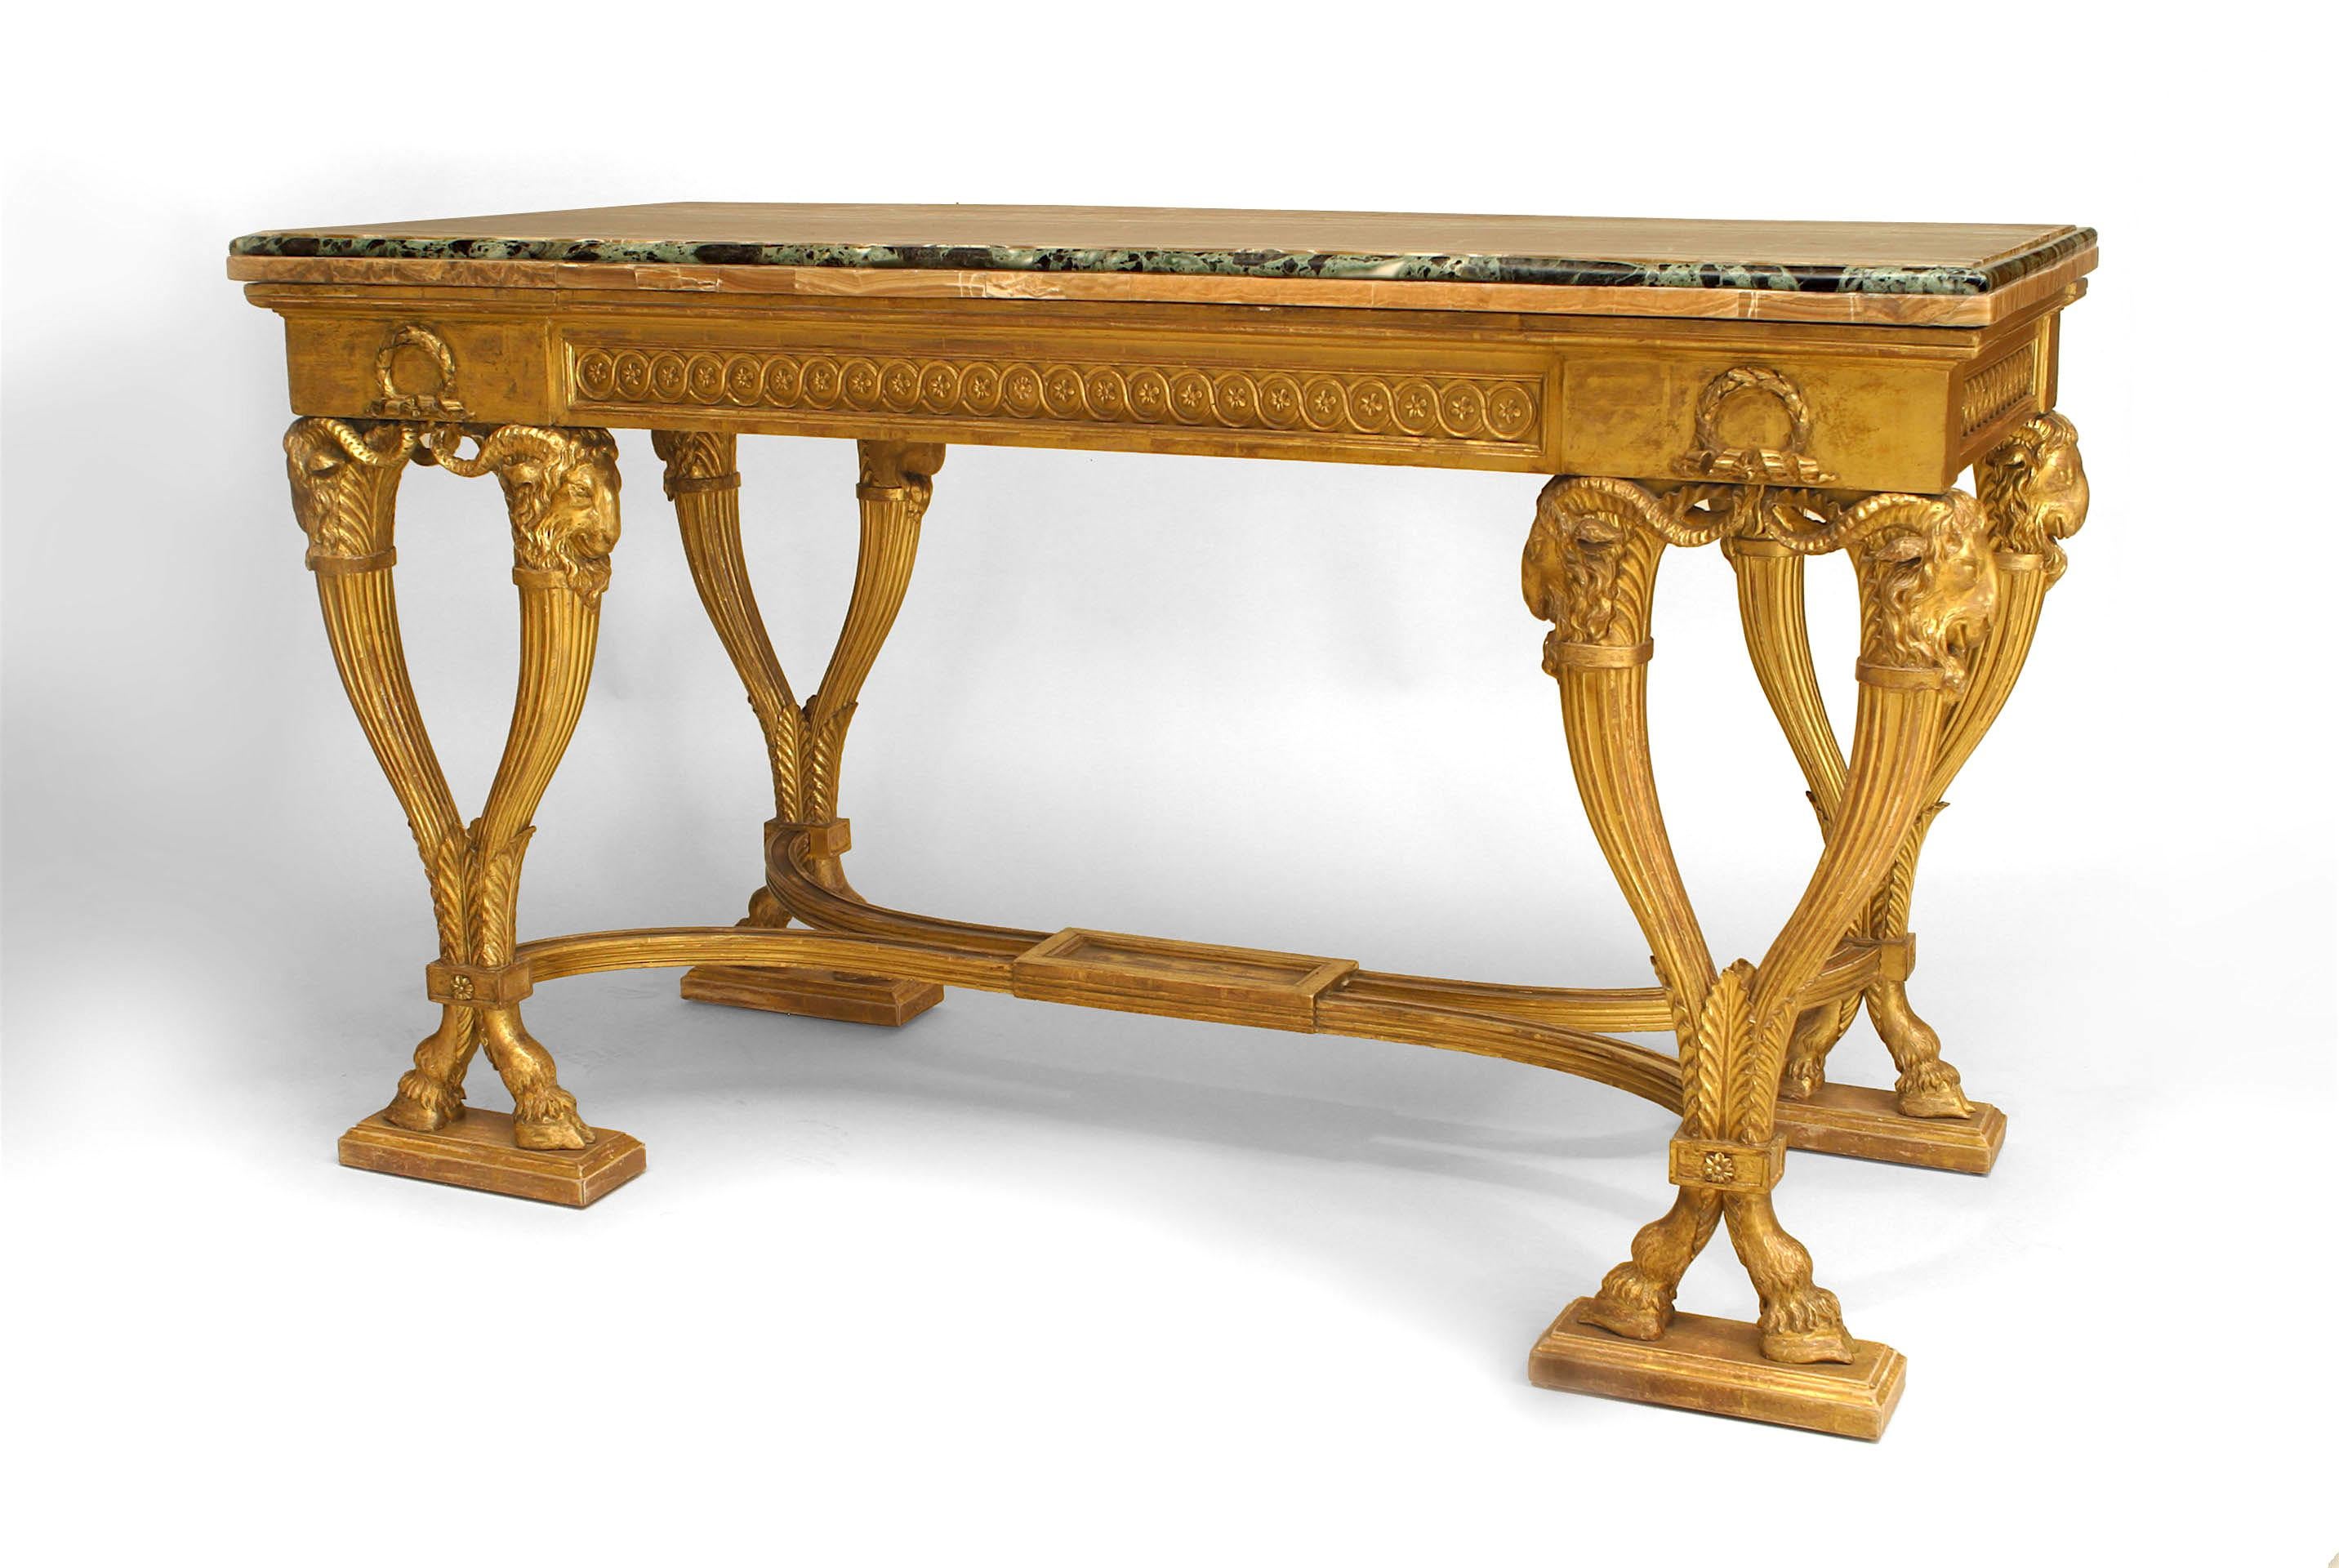 English Adam (circa 1780) gilt wood console with a carved frieze over rams head topped fluted legs with a stretcher & alabaster veneered marble top with a verde edge.
